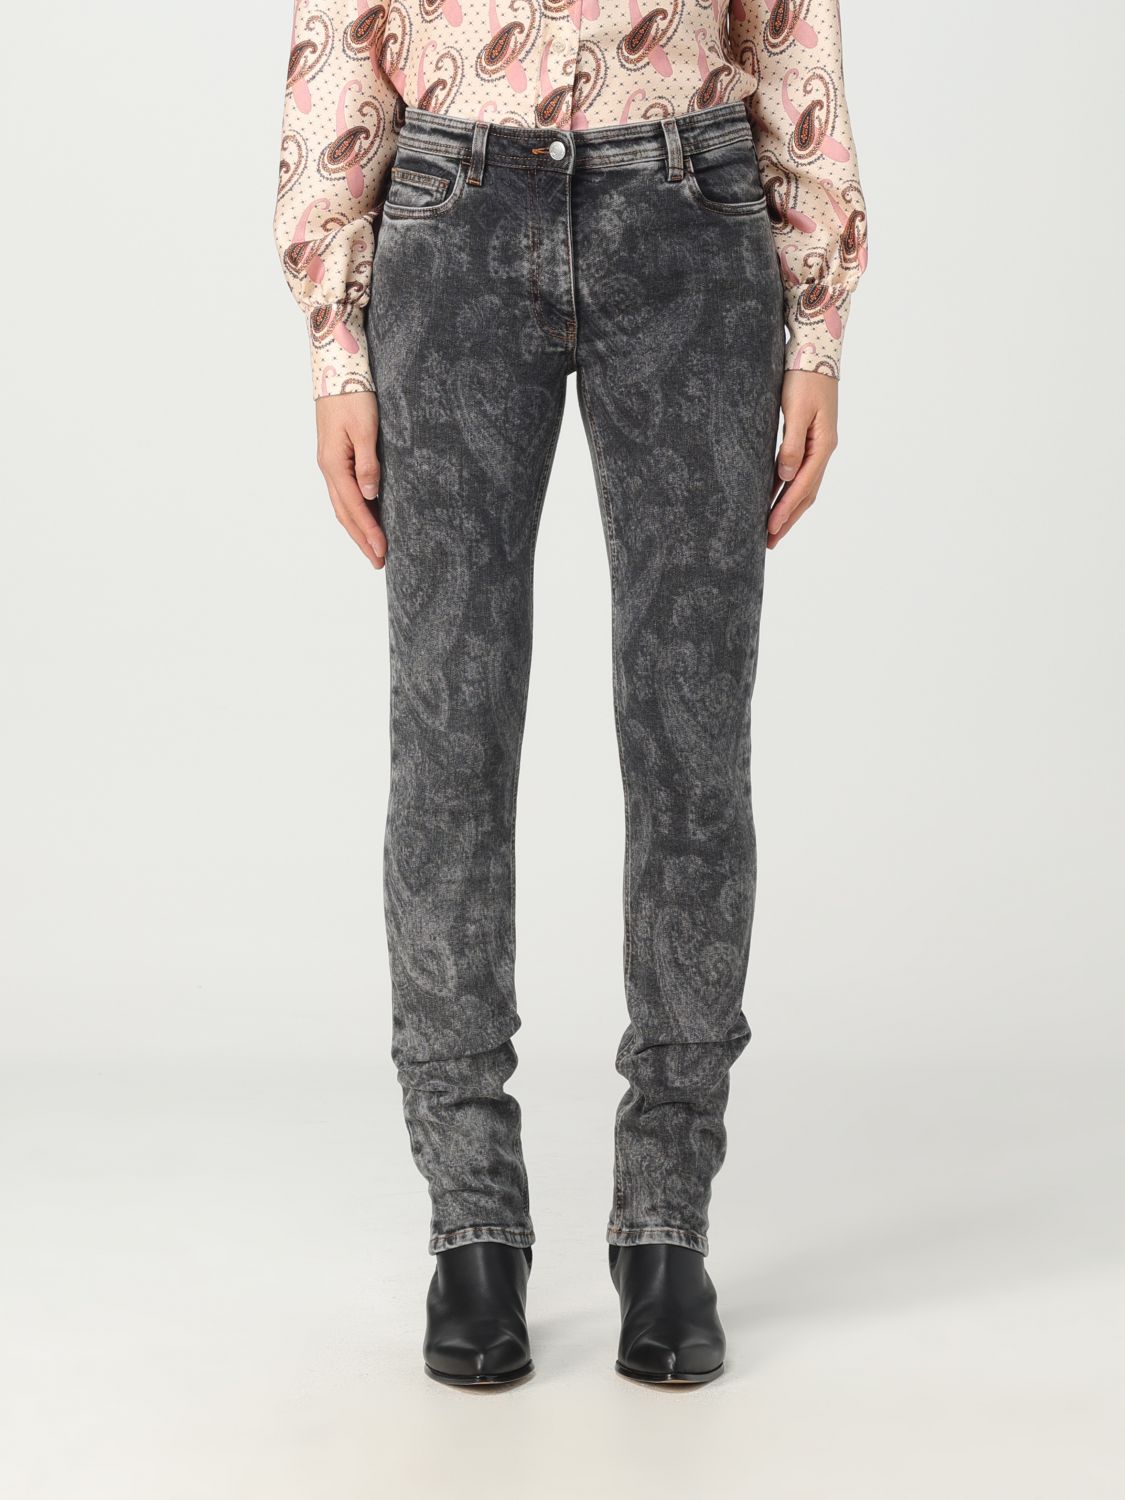 ETRO JEANS IN STRETCH COTTON DENIM WITH ALL-OVER PAISLEY PATTERN,E88326002